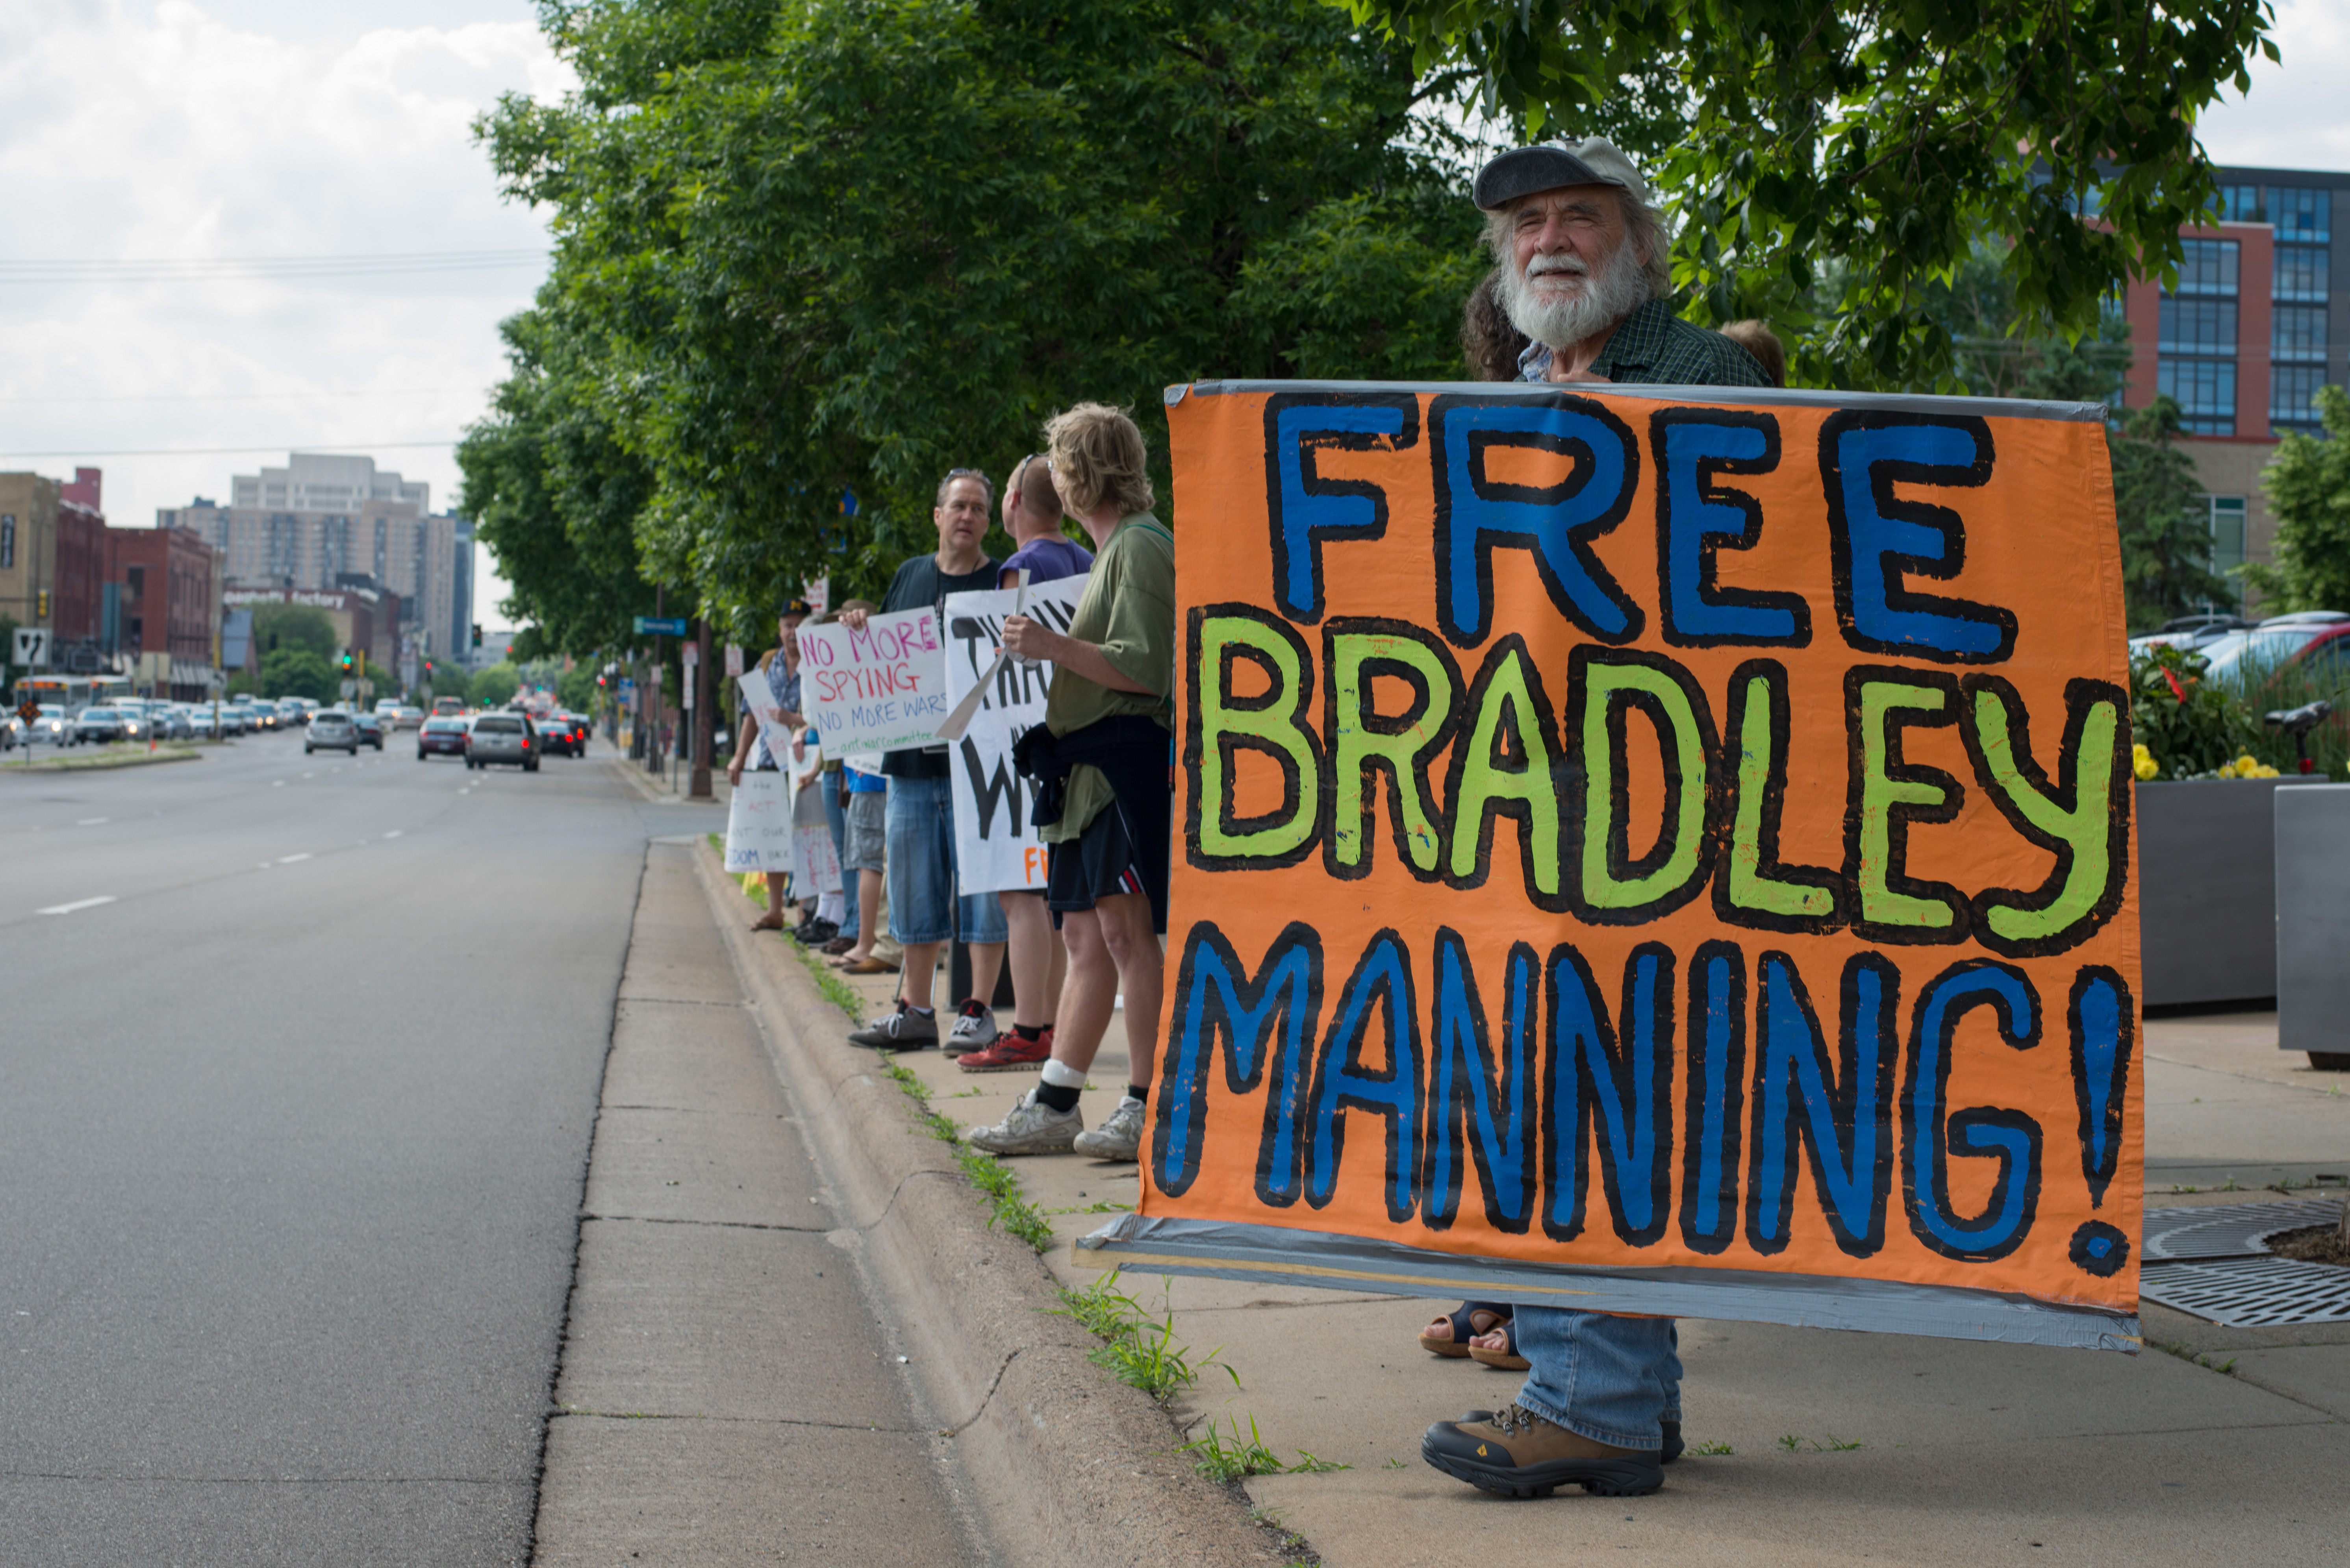 Bradley Manning supporter at a protest against NSA surveillance